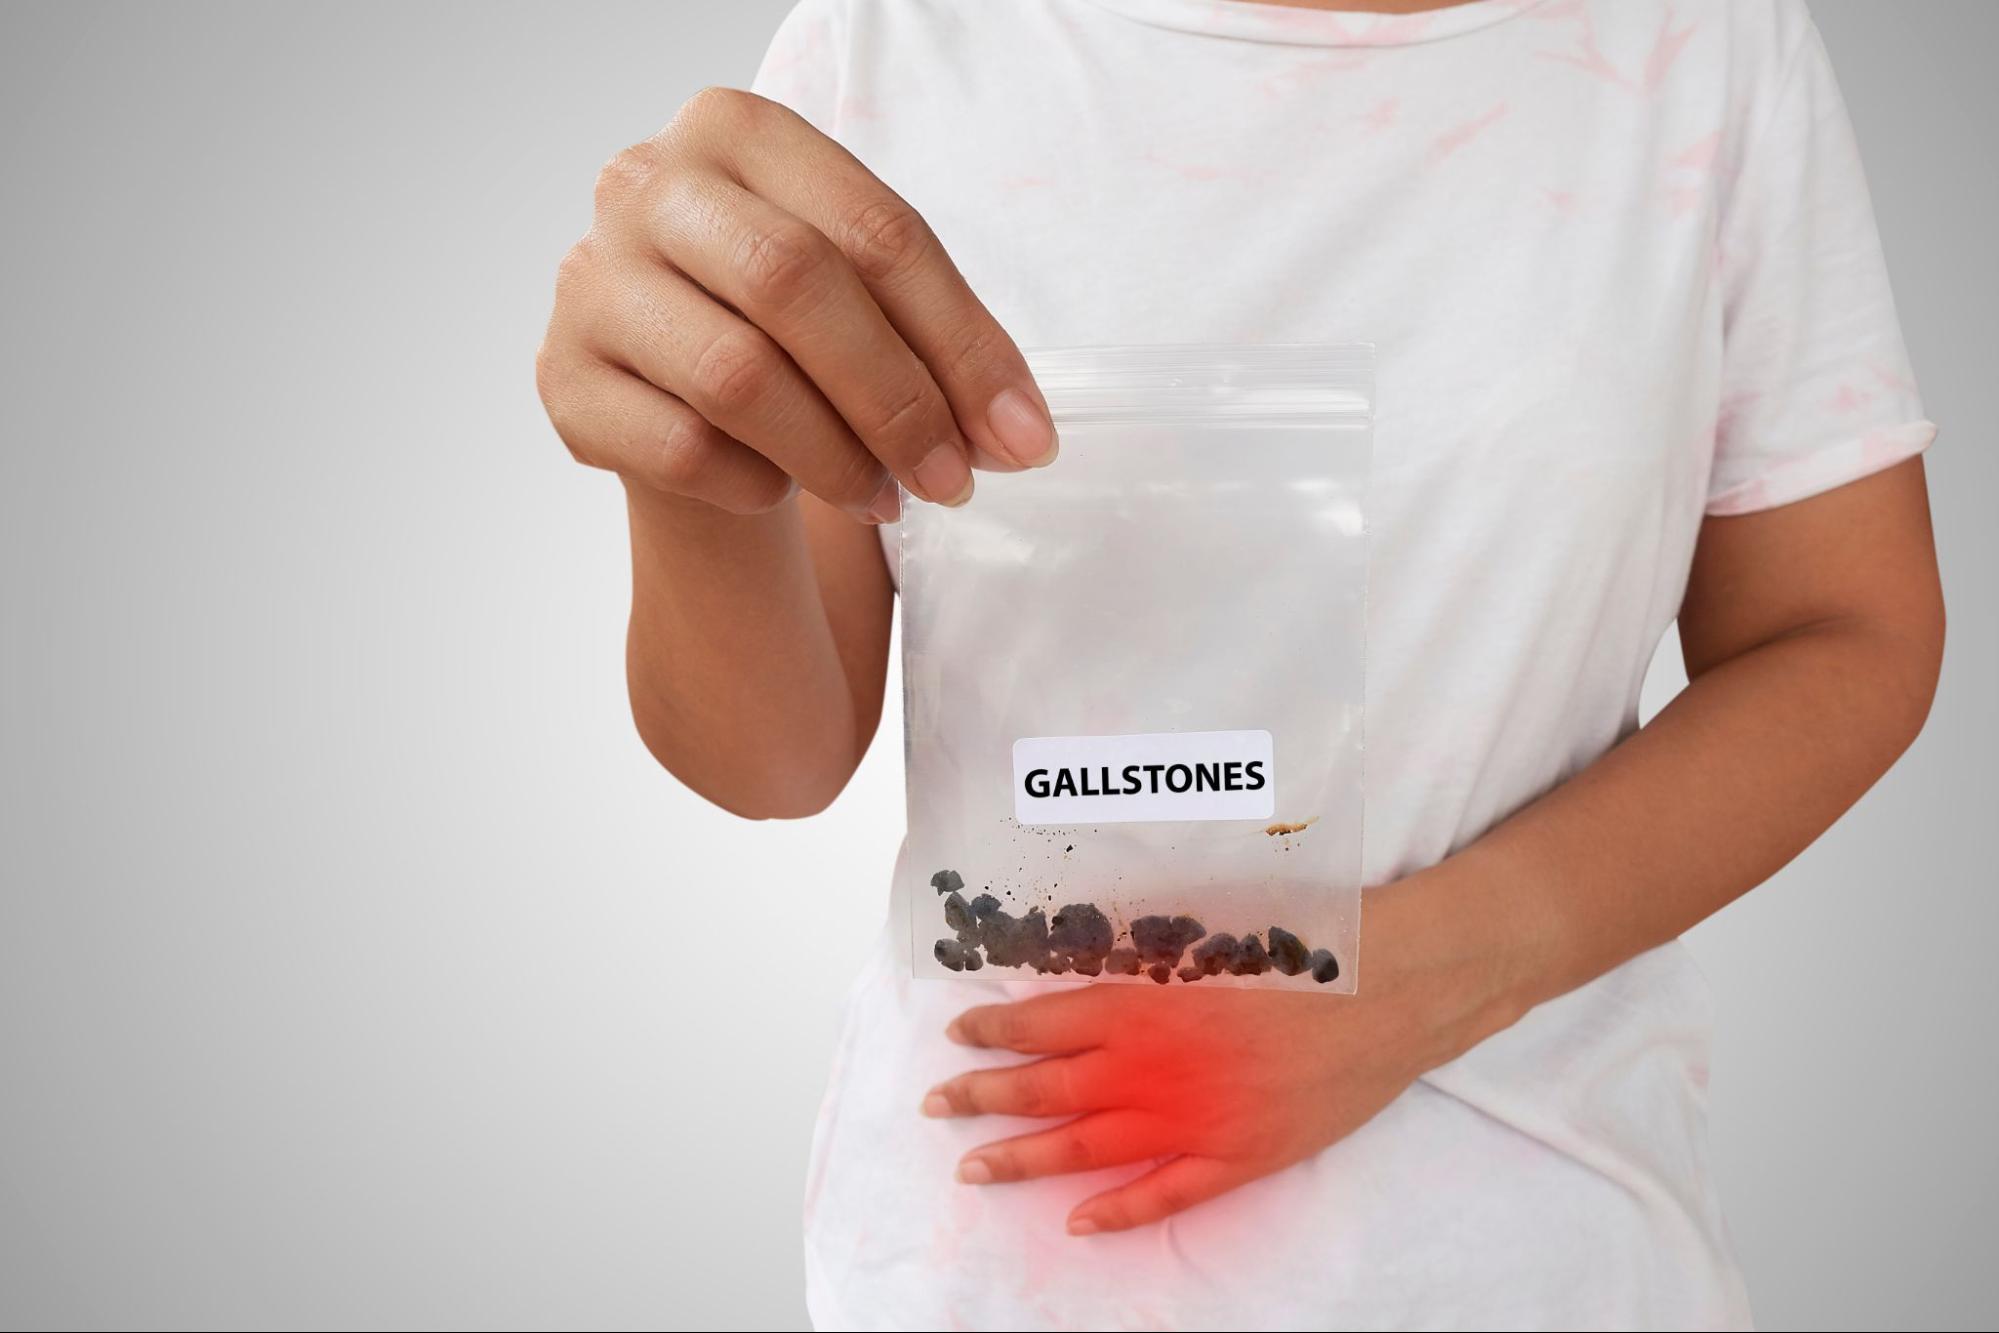 Gallbladder Stones: Navigating the Path to Treatment without Surgery